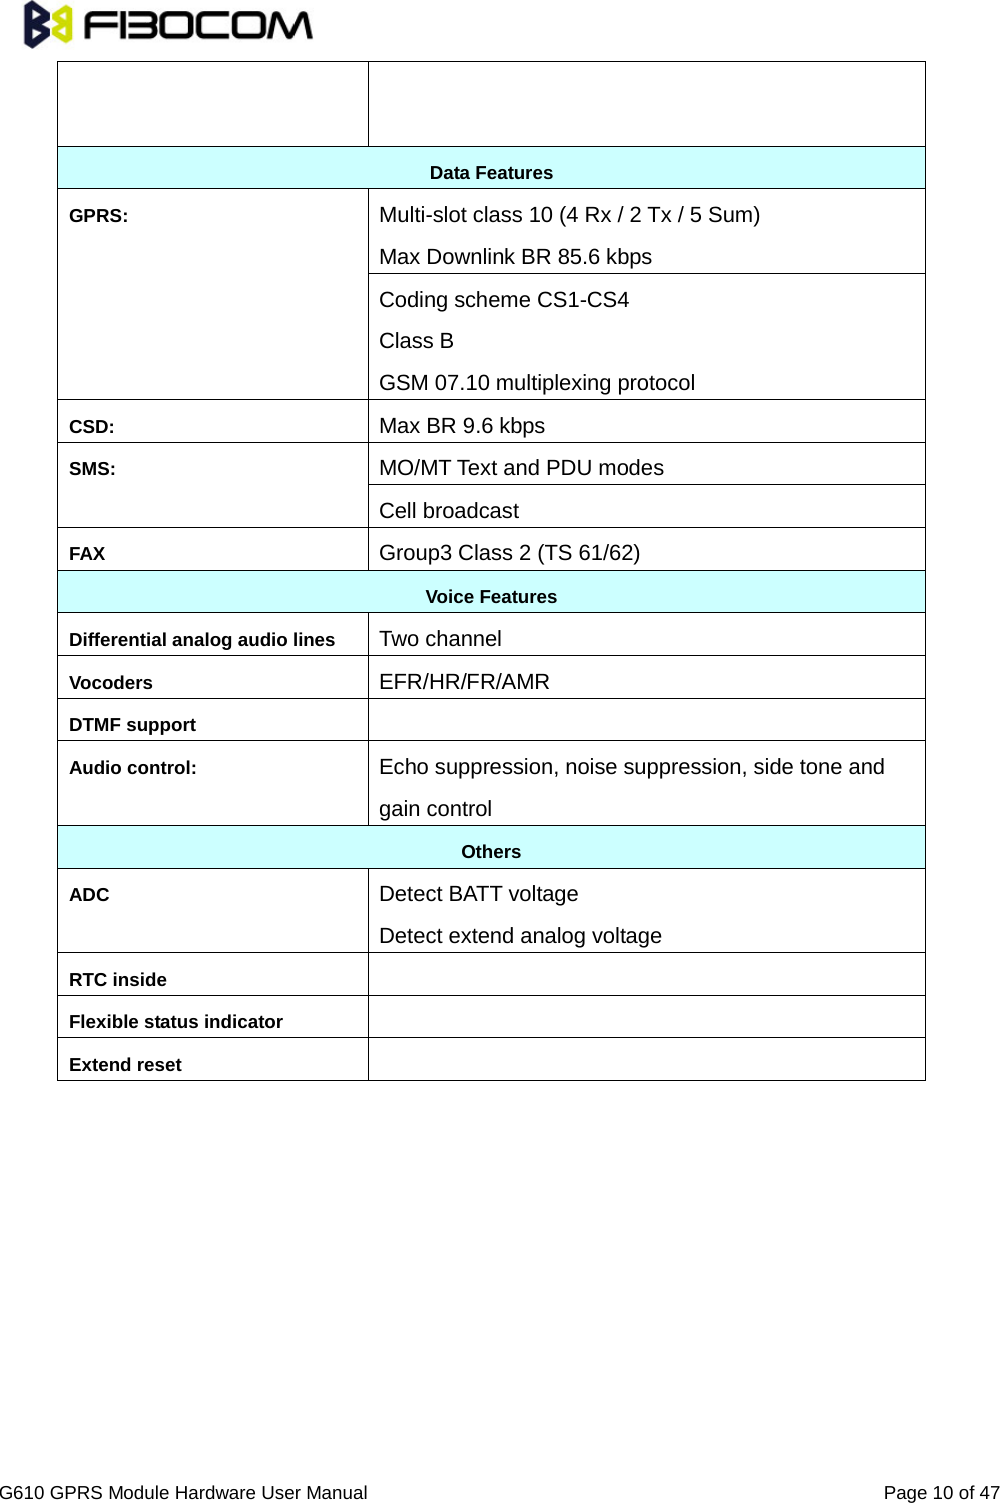                                                                               G610 GPRS Module Hardware User Manual                                                          Page 10 of 47    Data Features GPRS:   Multi-slot class 10 (4 Rx / 2 Tx / 5 Sum)   Max Downlink BR 85.6 kbps Coding scheme CS1-CS4   Class B GSM 07.10 multiplexing protocol   CSD:   Max BR 9.6 kbps   SMS:   MO/MT Text and PDU modes   Cell broadcast   FAX Group3 Class 2 (TS 61/62) Voice Features Differential analog audio lines   Two channel Vocoders   EFR/HR/FR/AMR   DTMF support    Audio control:   Echo suppression, noise suppression, side tone and gain control Others ADC Detect BATT voltage Detect extend analog voltage RTC inside  Flexible status indicator  Extend reset           